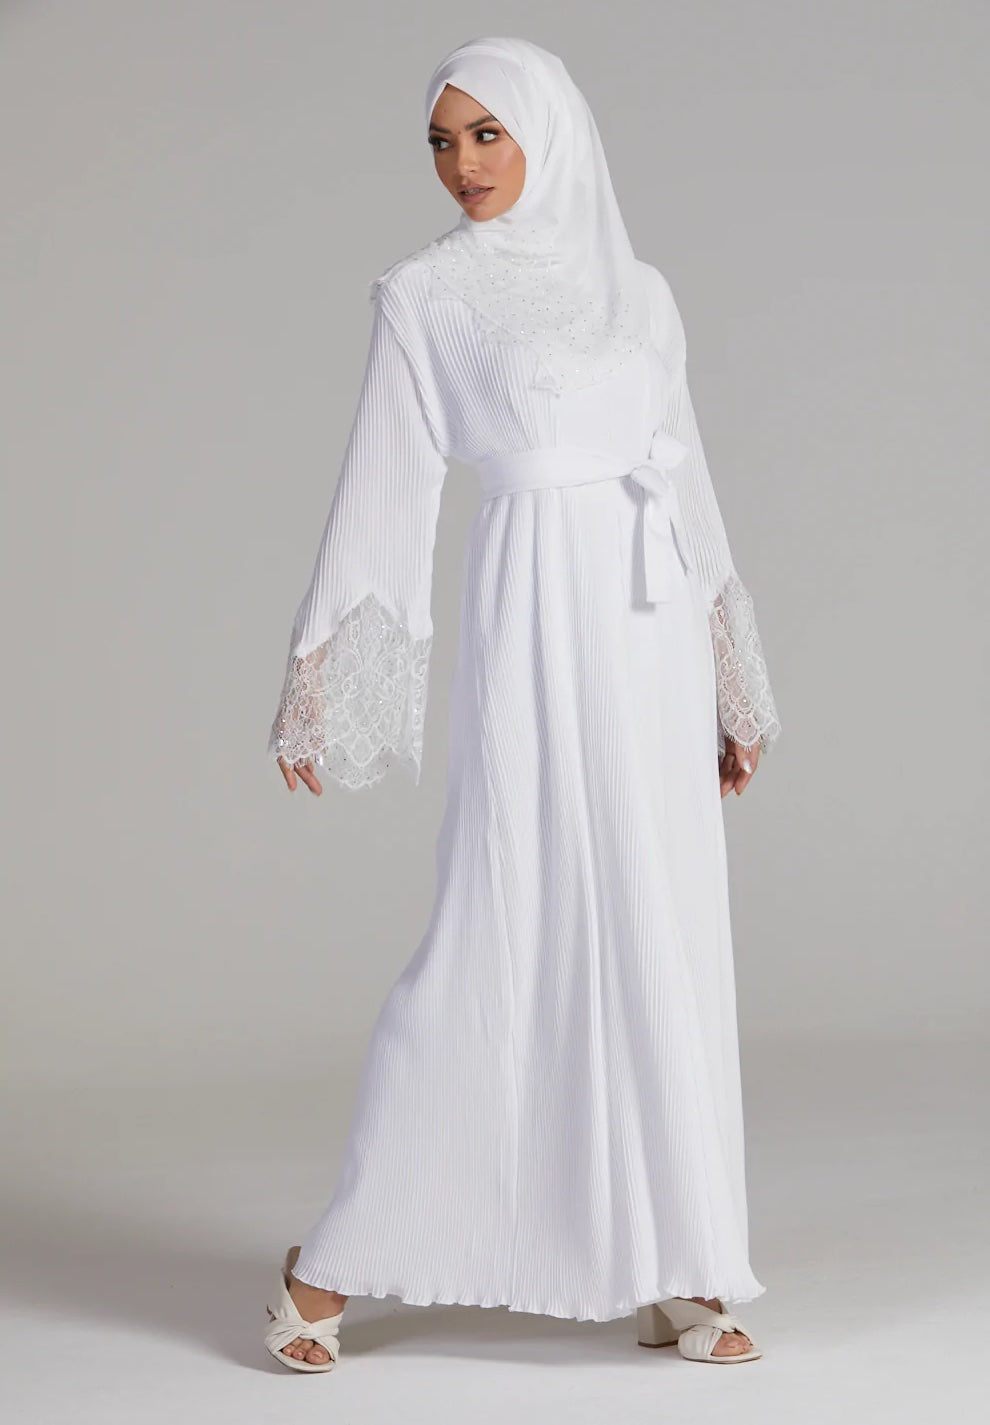 How to Wear White Abayas: 4 Must-Know Modest Fashion Hacks